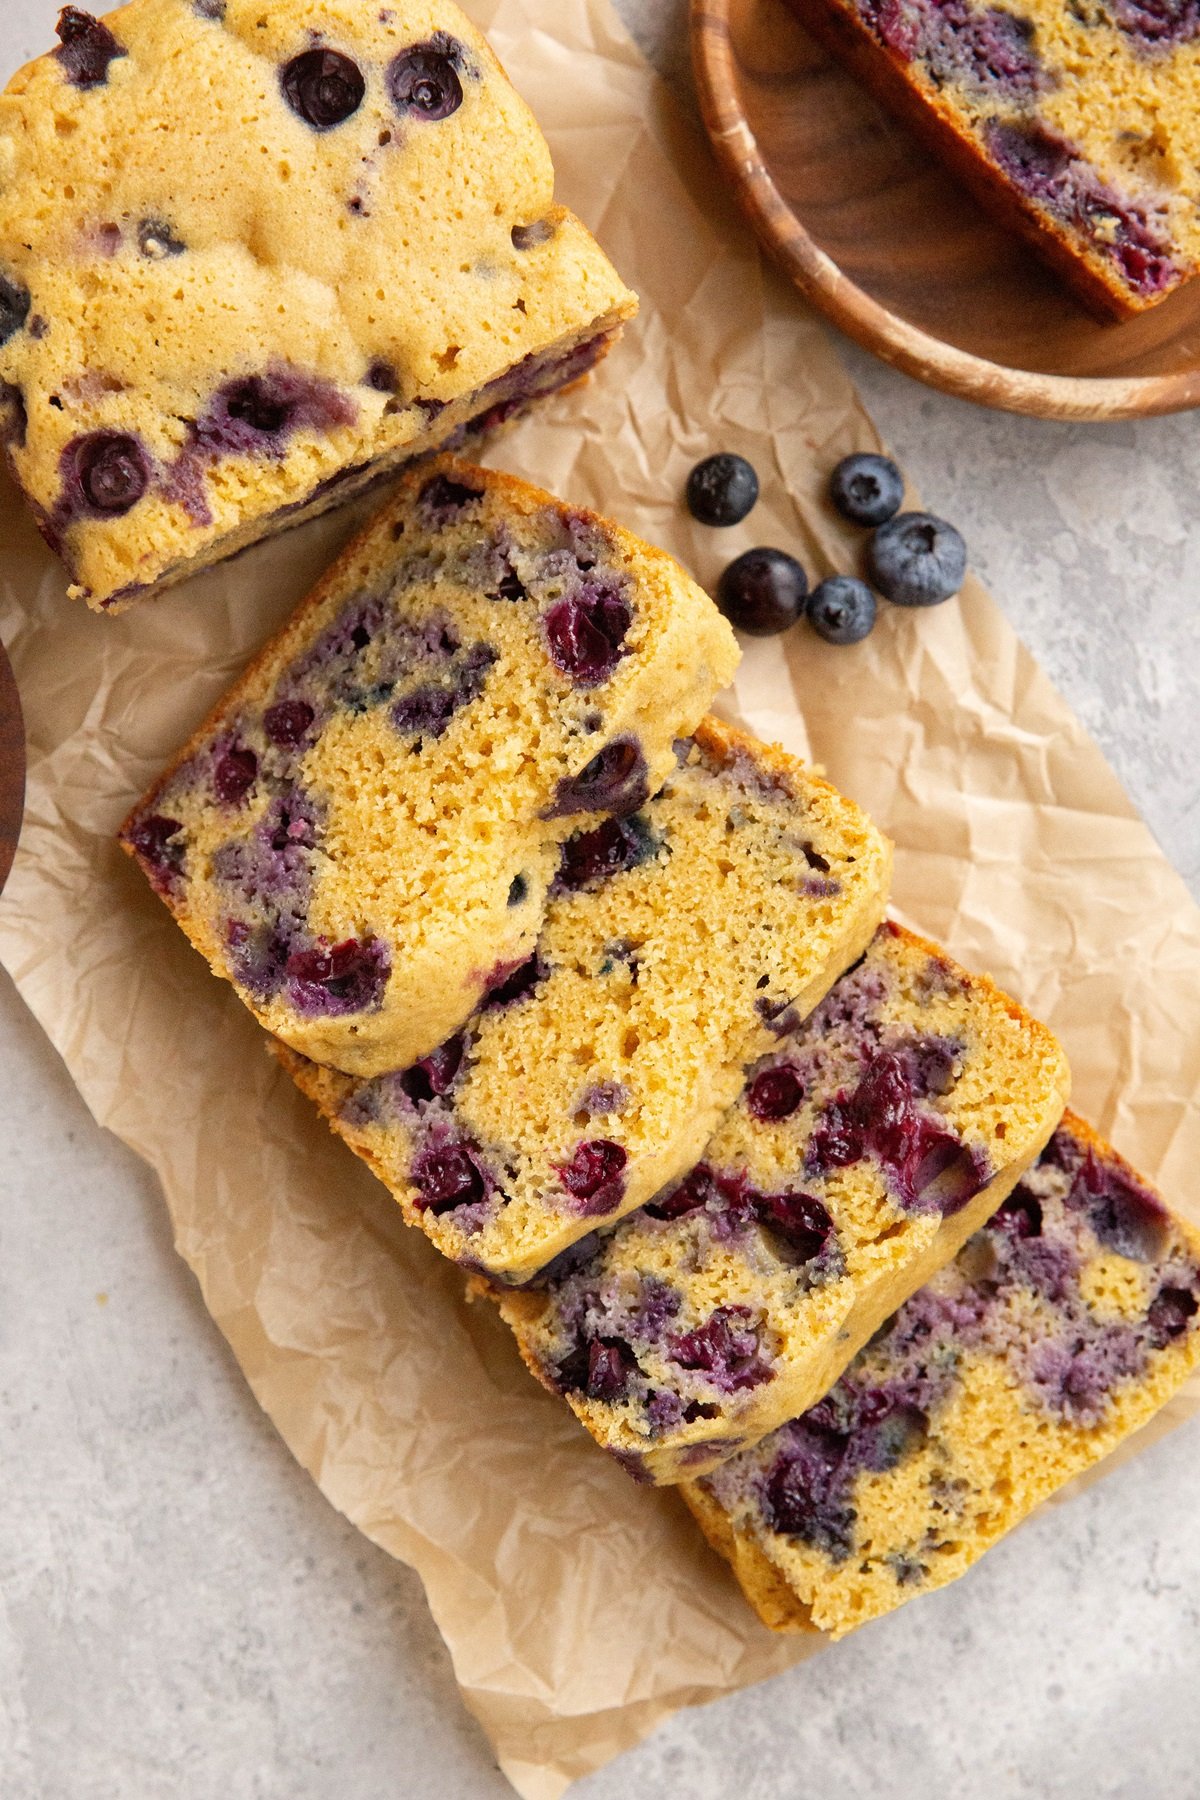 Grain-free blueberry bread sliced on a sheet of parchment paper.